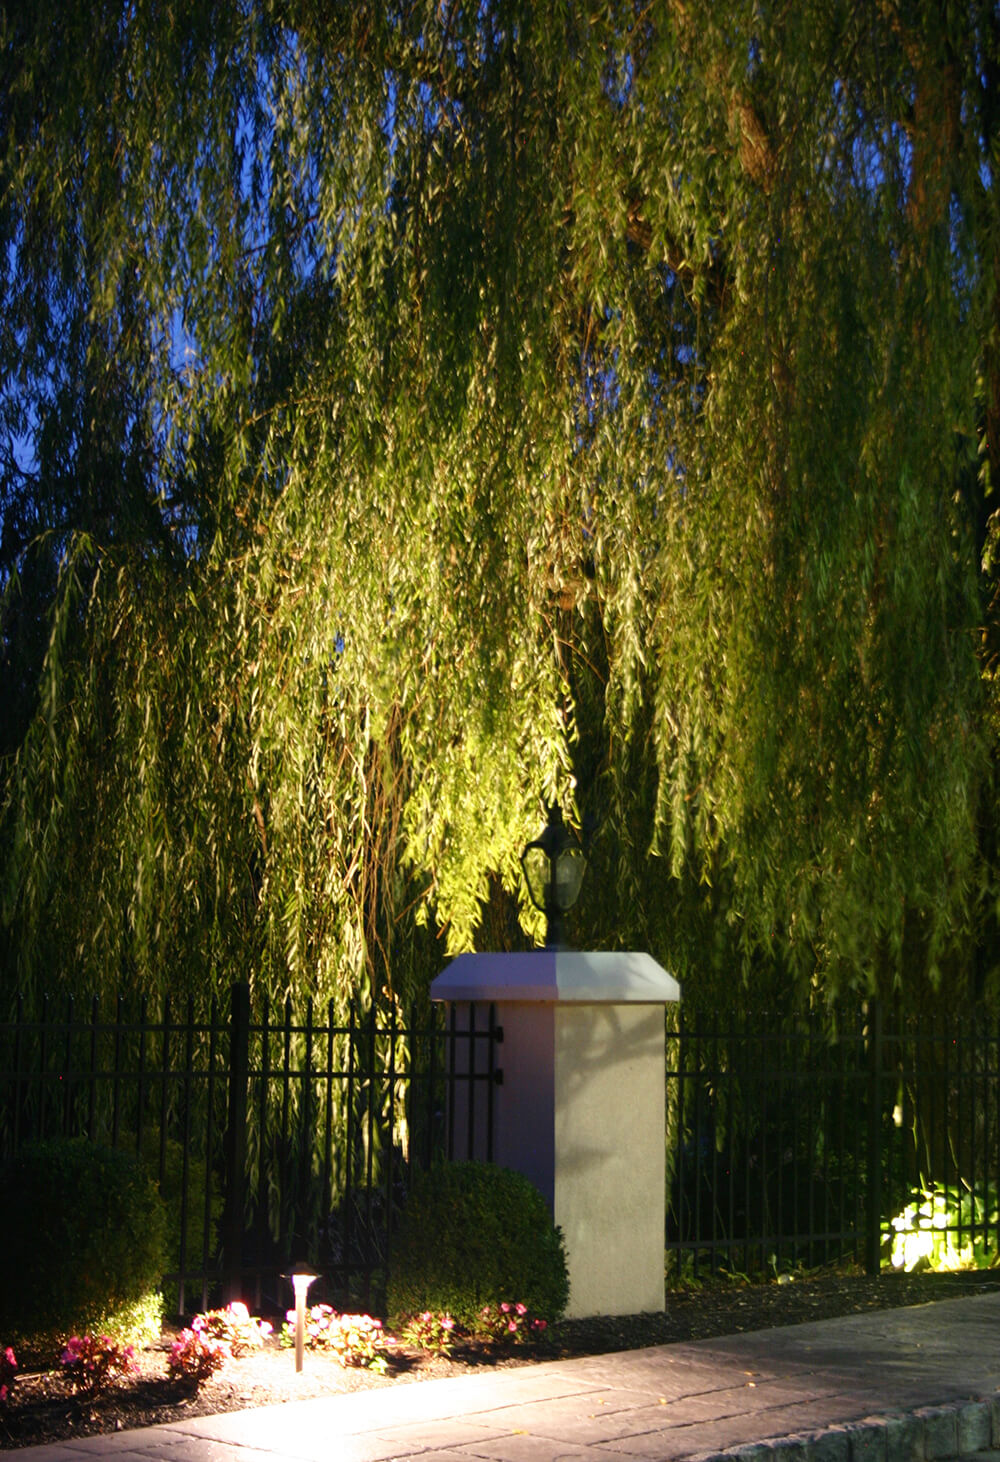 Weeping willow with specialty lighting